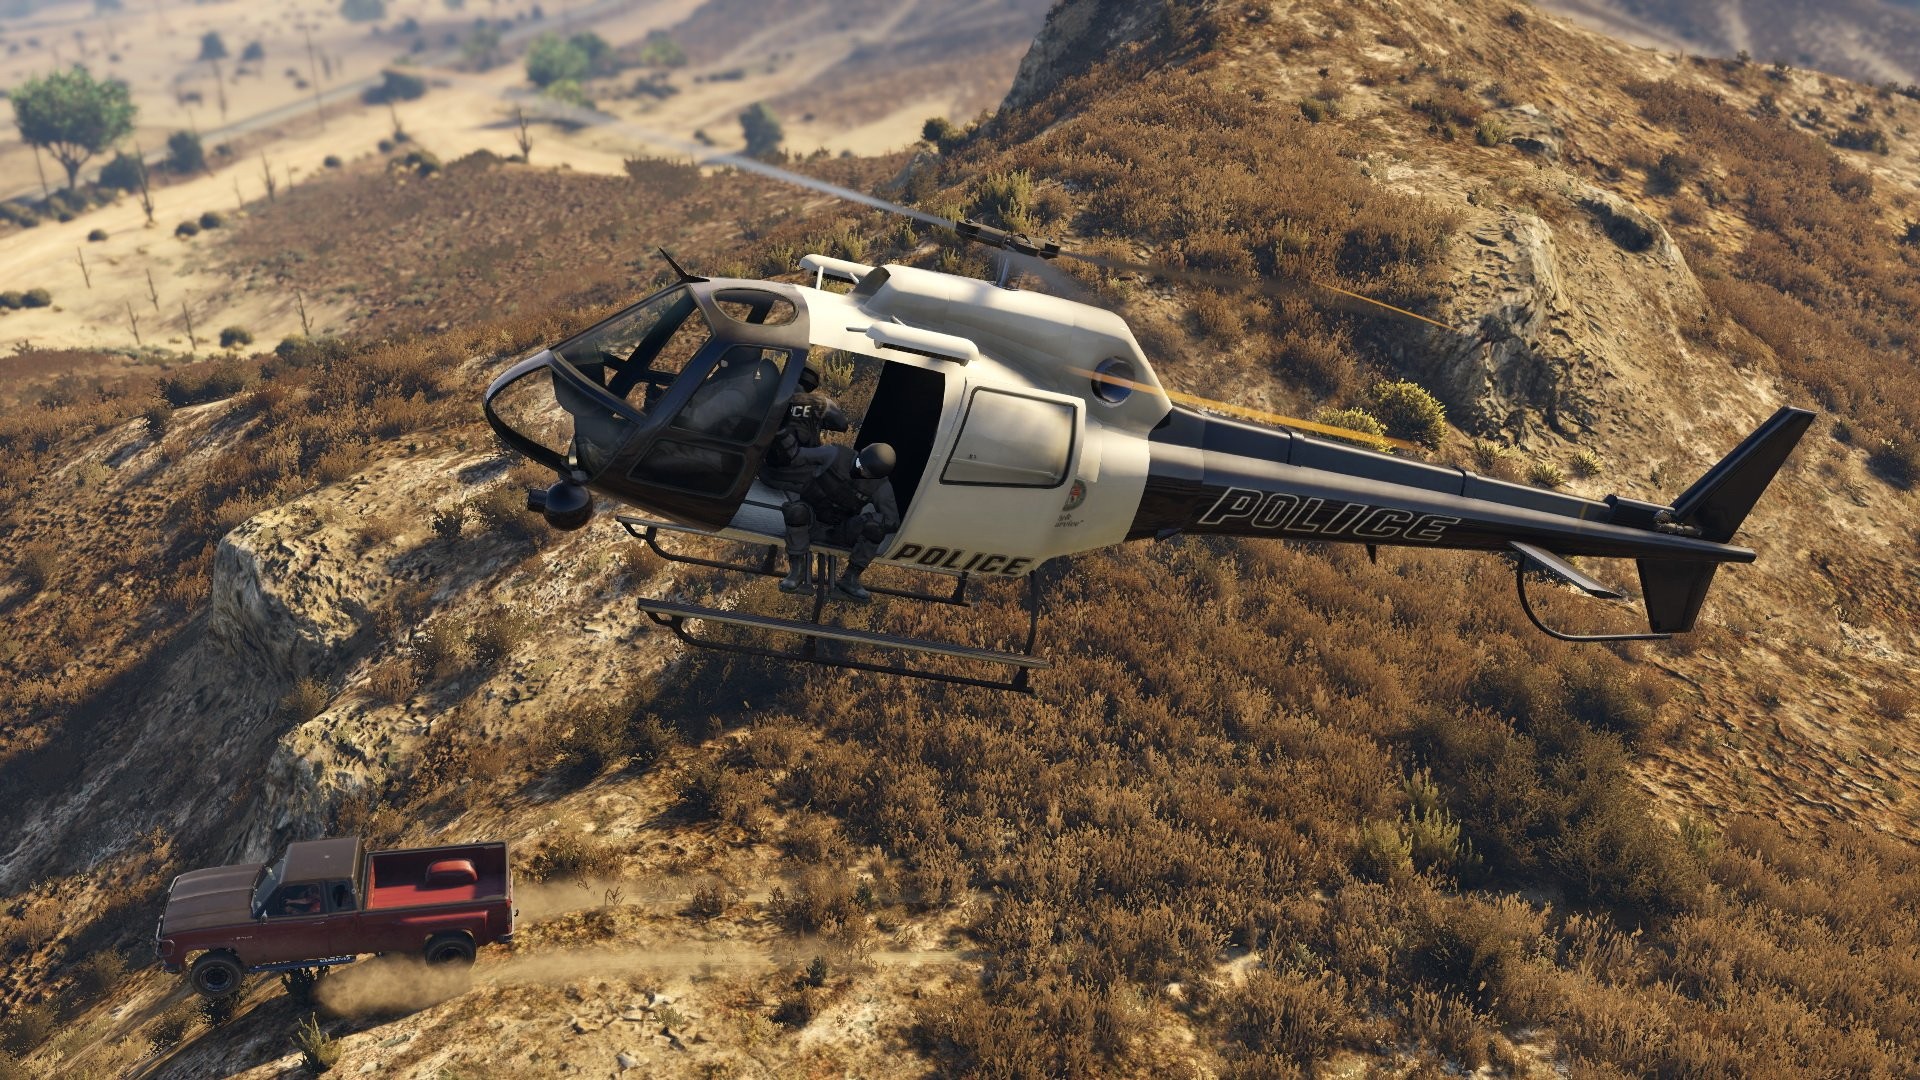 General 1920x1080 Grand Theft Auto V video games helicopters PC gaming car screen shot vehicle aircraft